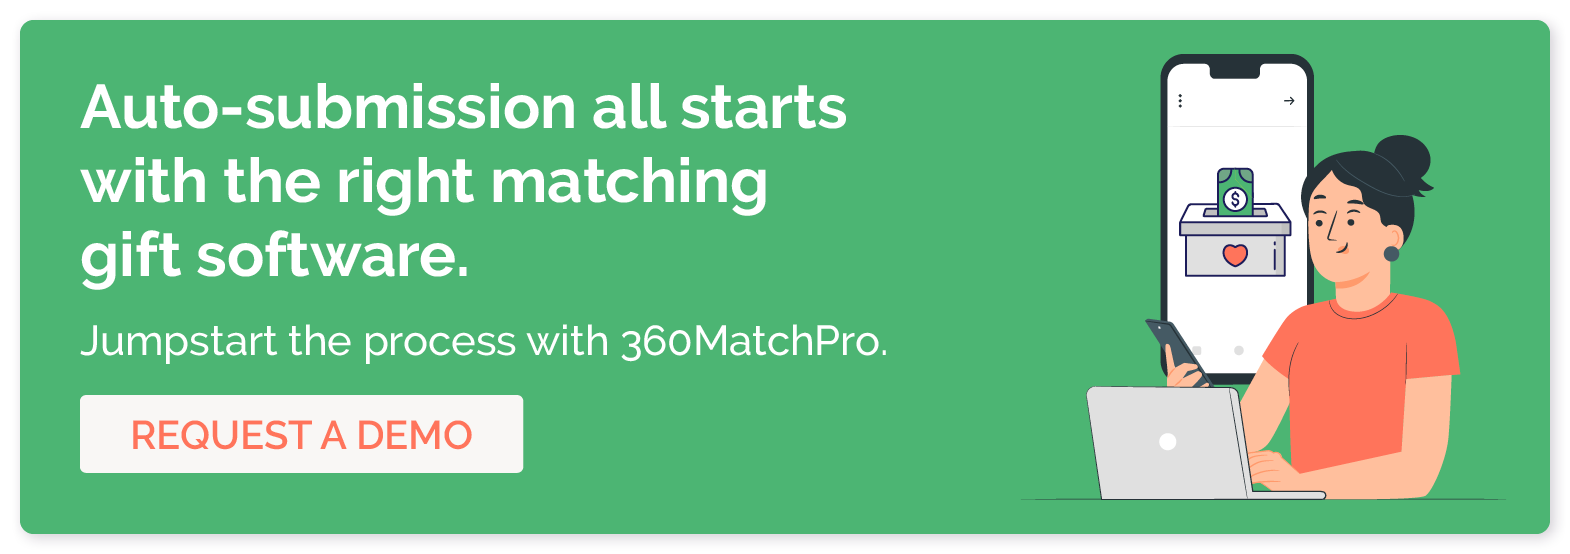 Auto-submission all starts with the right matching gift software. Jumpstart the process with 360MatchPro. Request a demo.